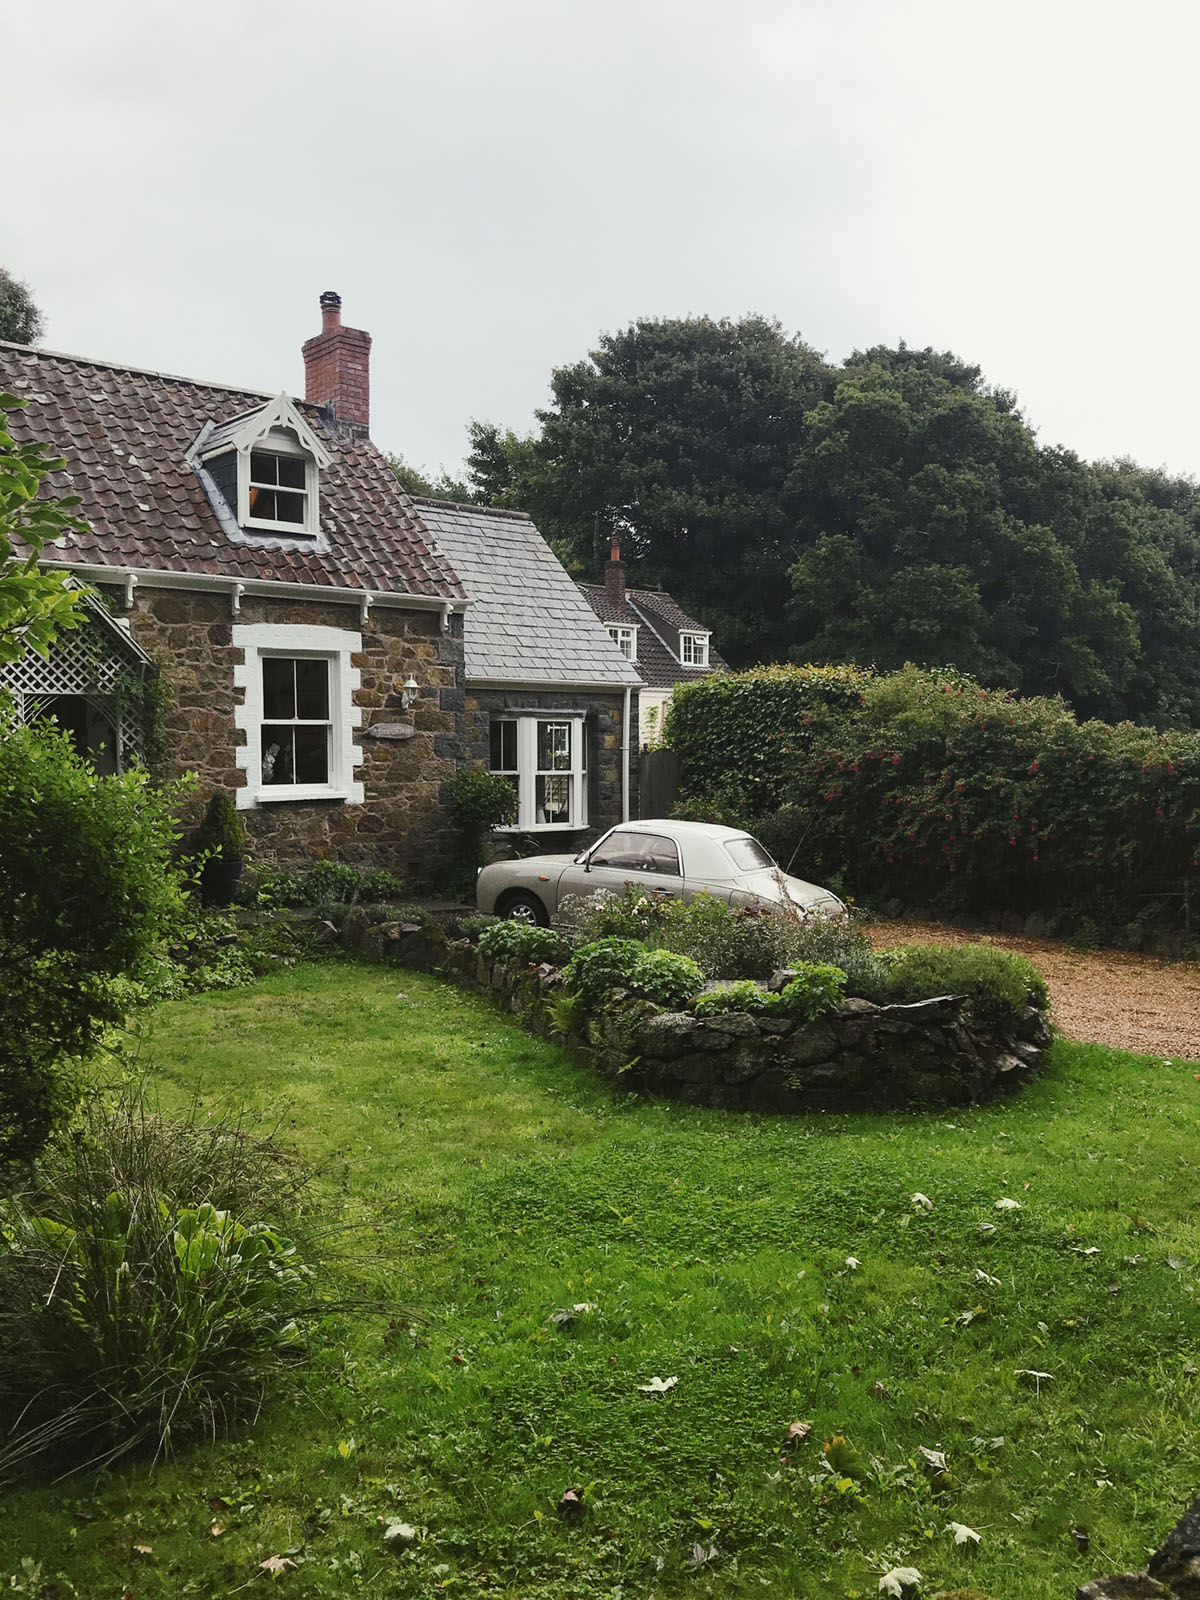 perfect country home with vintage car | guernsey travel guide on coco kelley